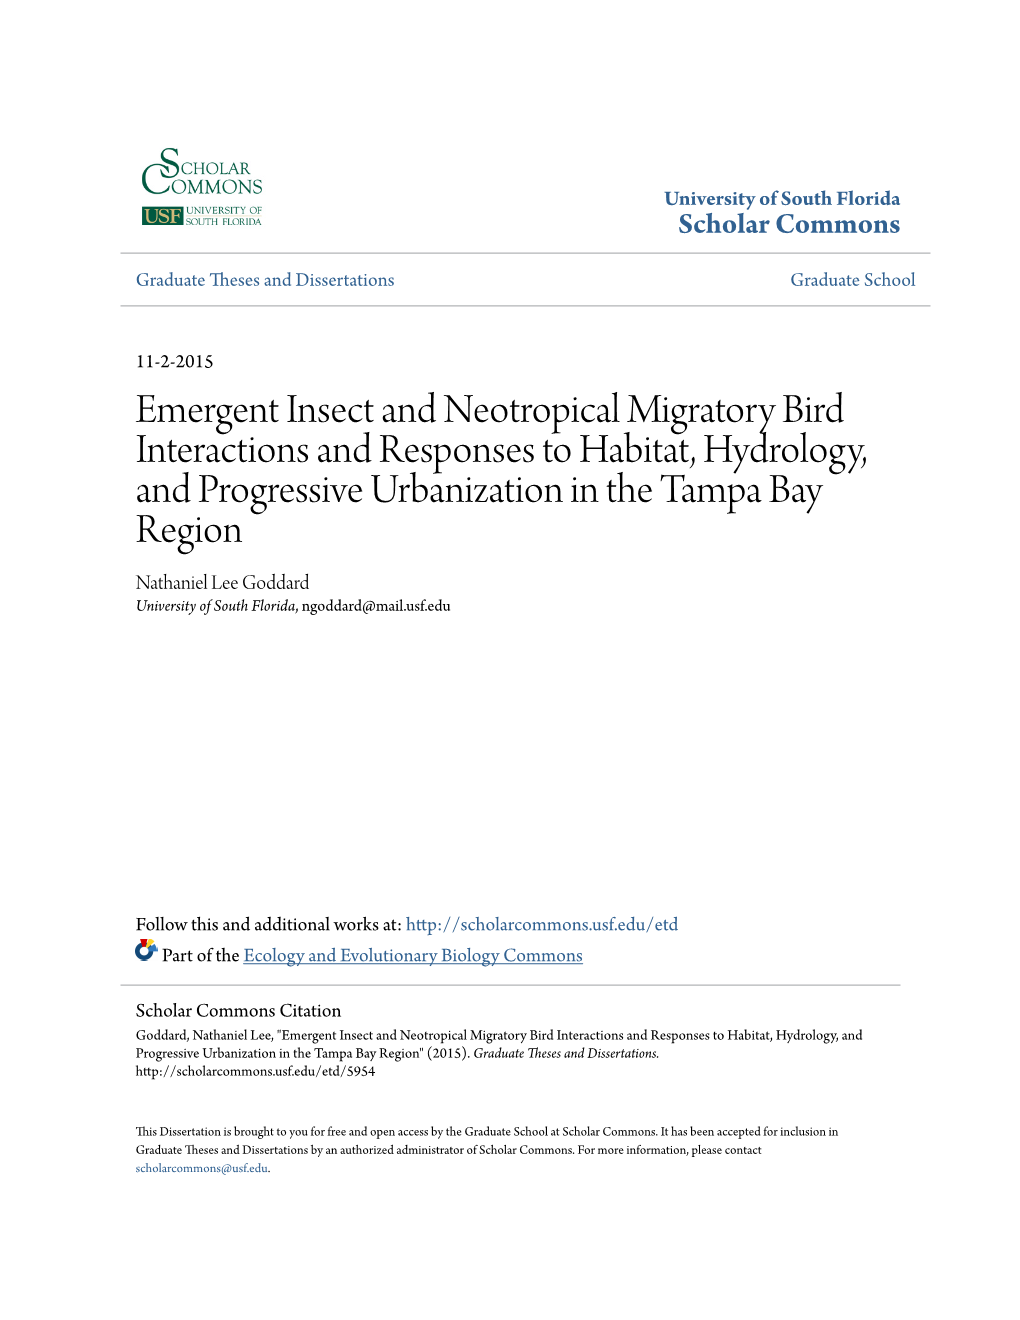 Emergent Insect and Neotropical Migratory Bird Interactions and Responses to Habitat, Hydrology, and Progressive Urbanization In